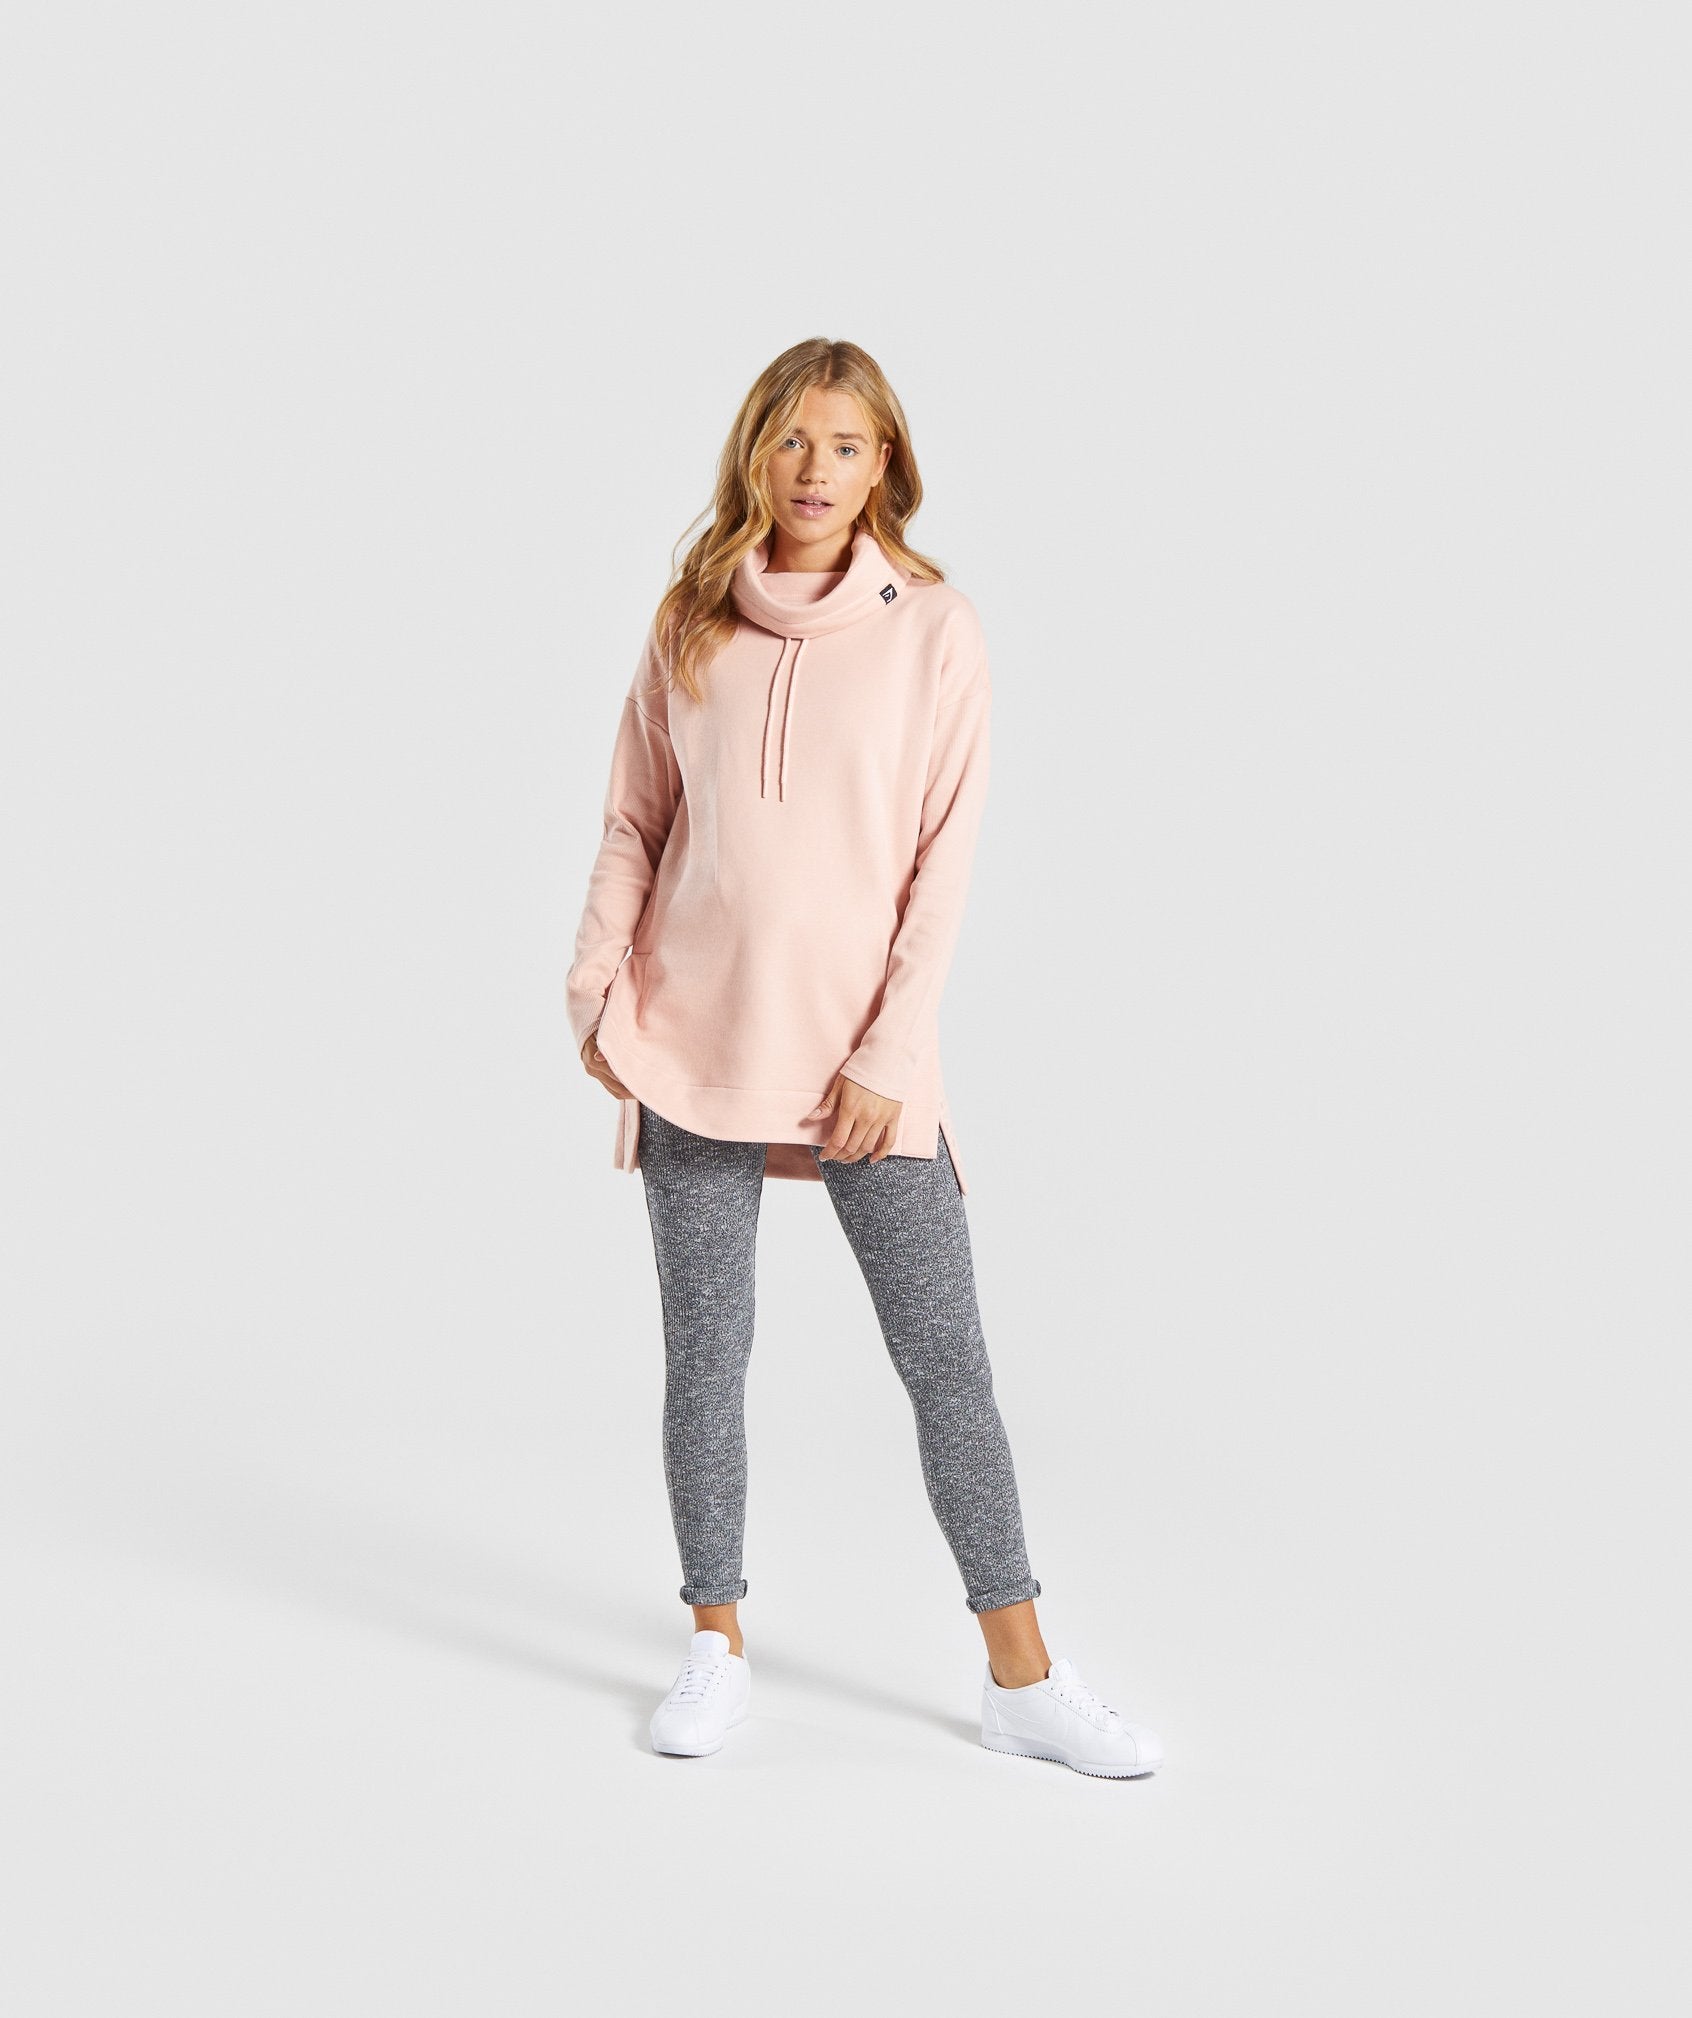 Slounge Ribbed Pullover in Blush Nude - view 6